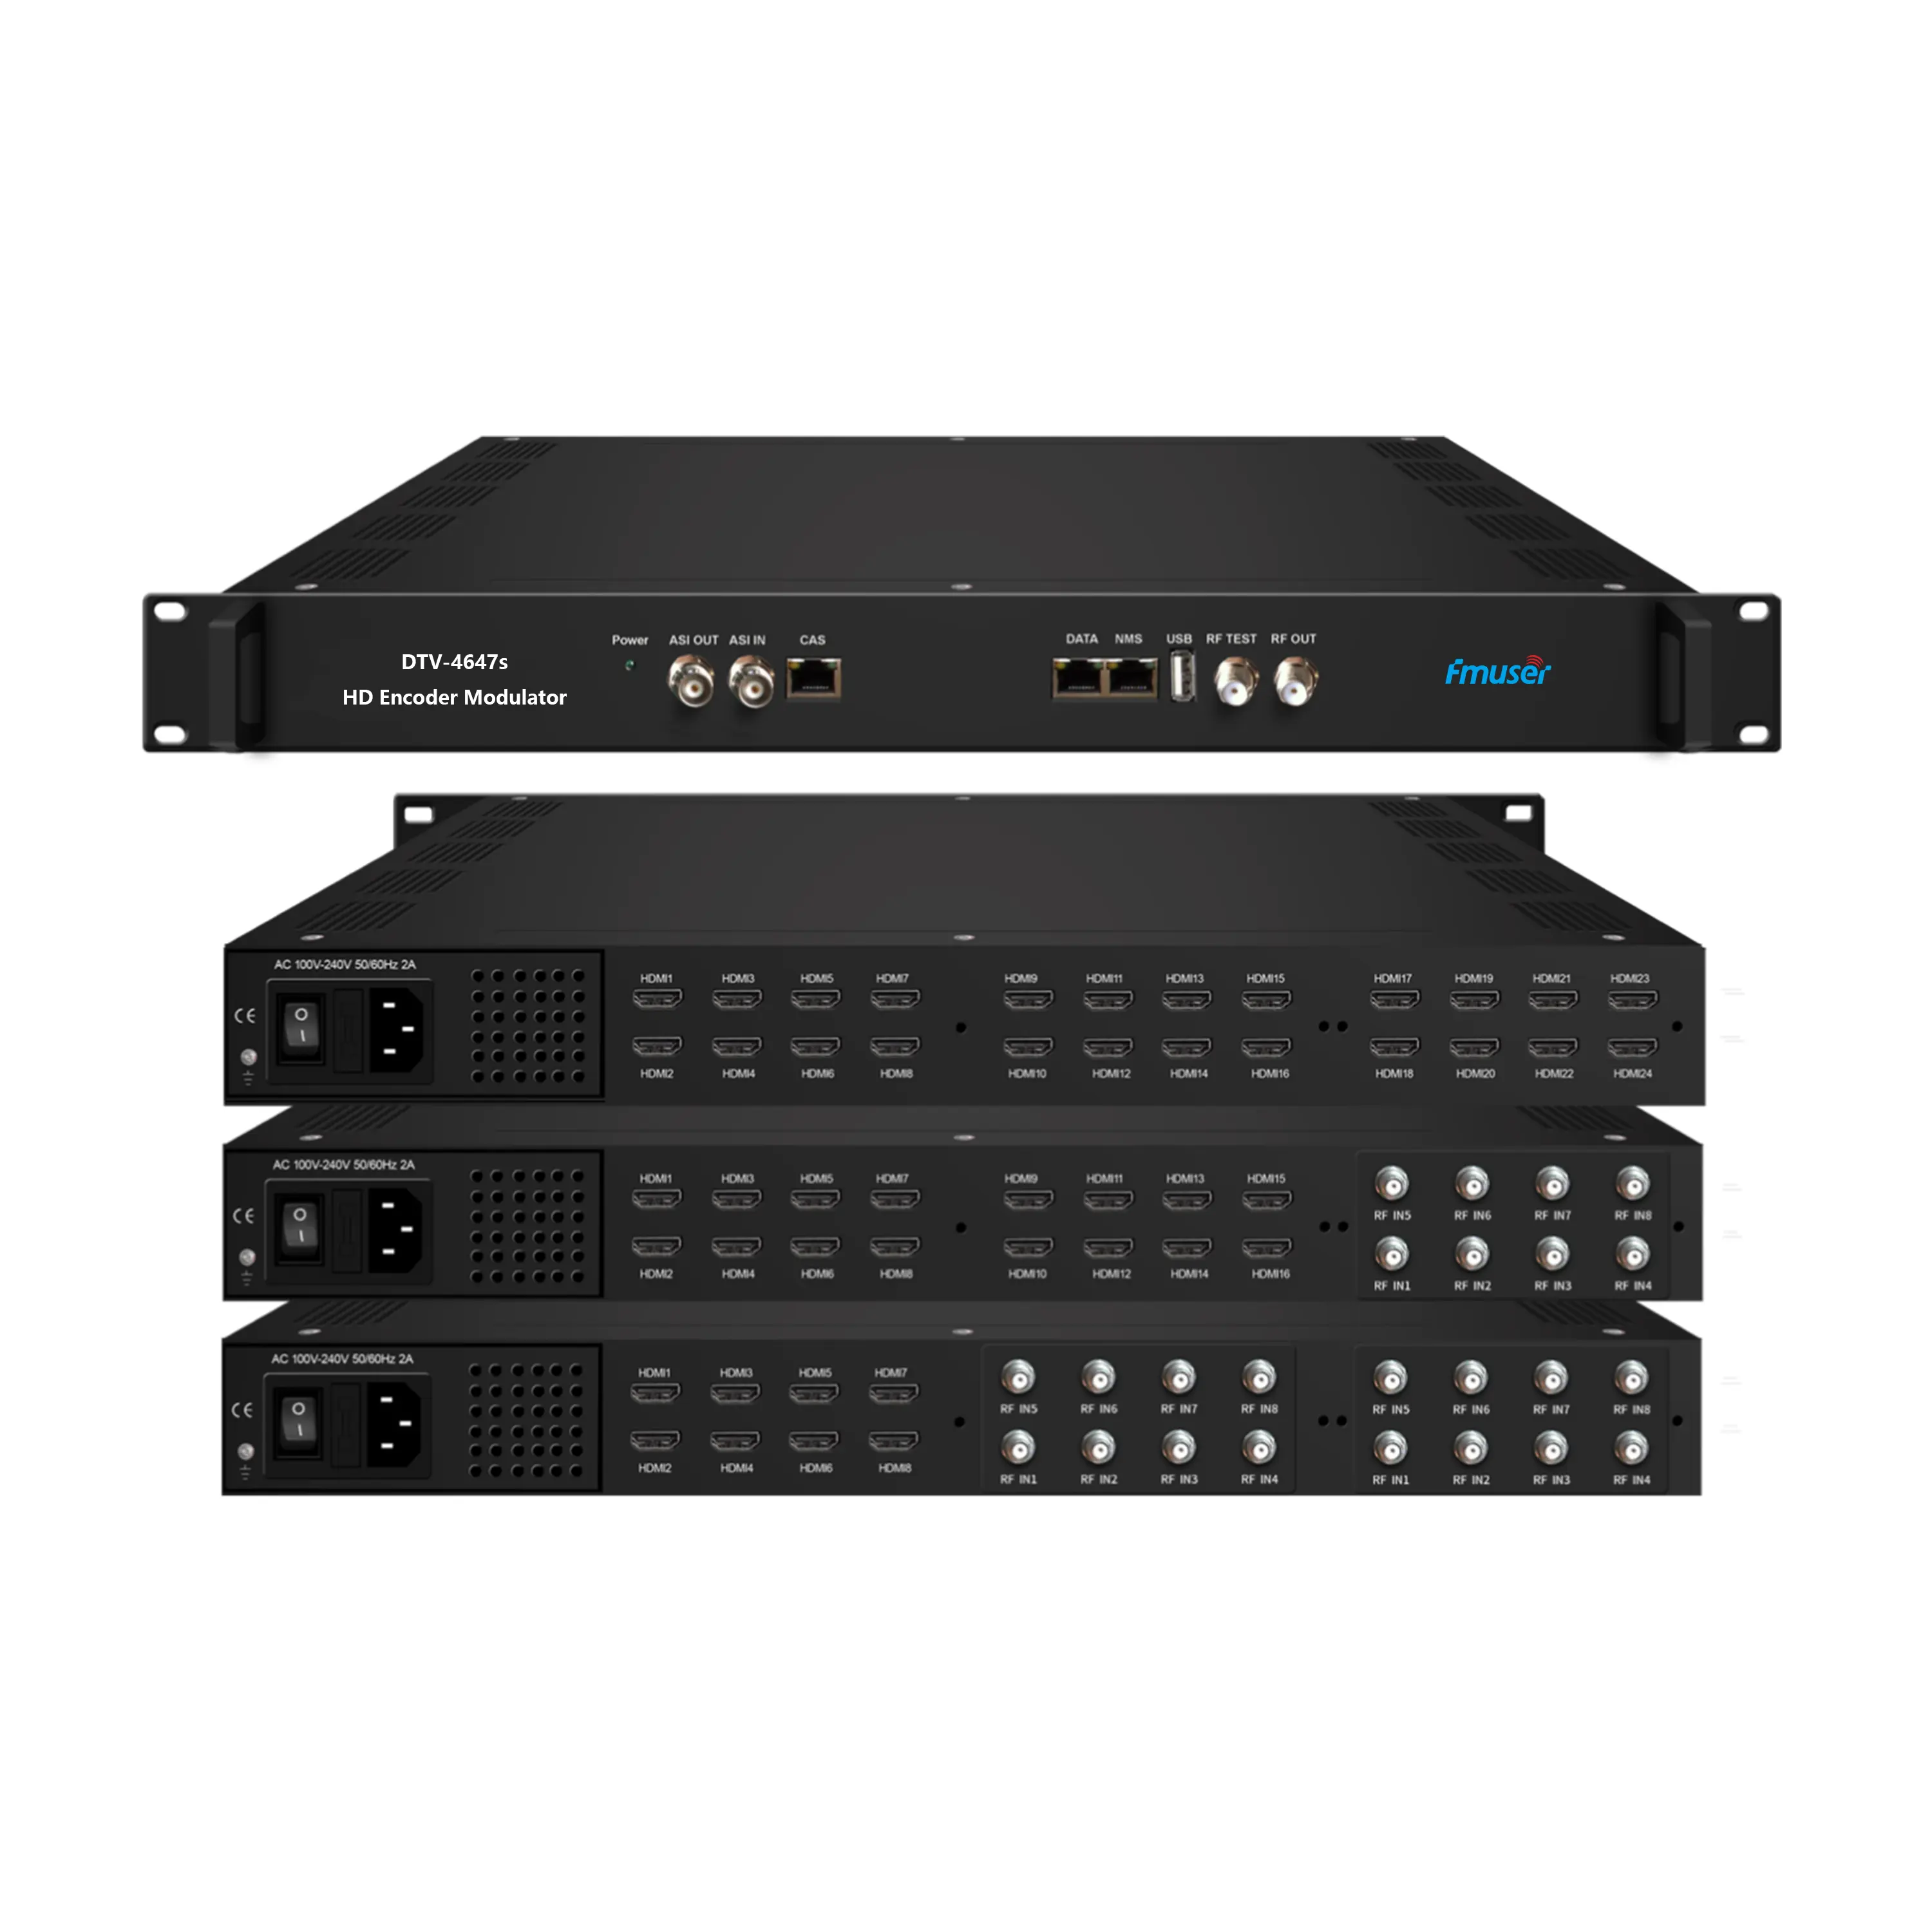 DTV-4647S-8 8 HD in 8 DVB-T IP out Encoder Modulator